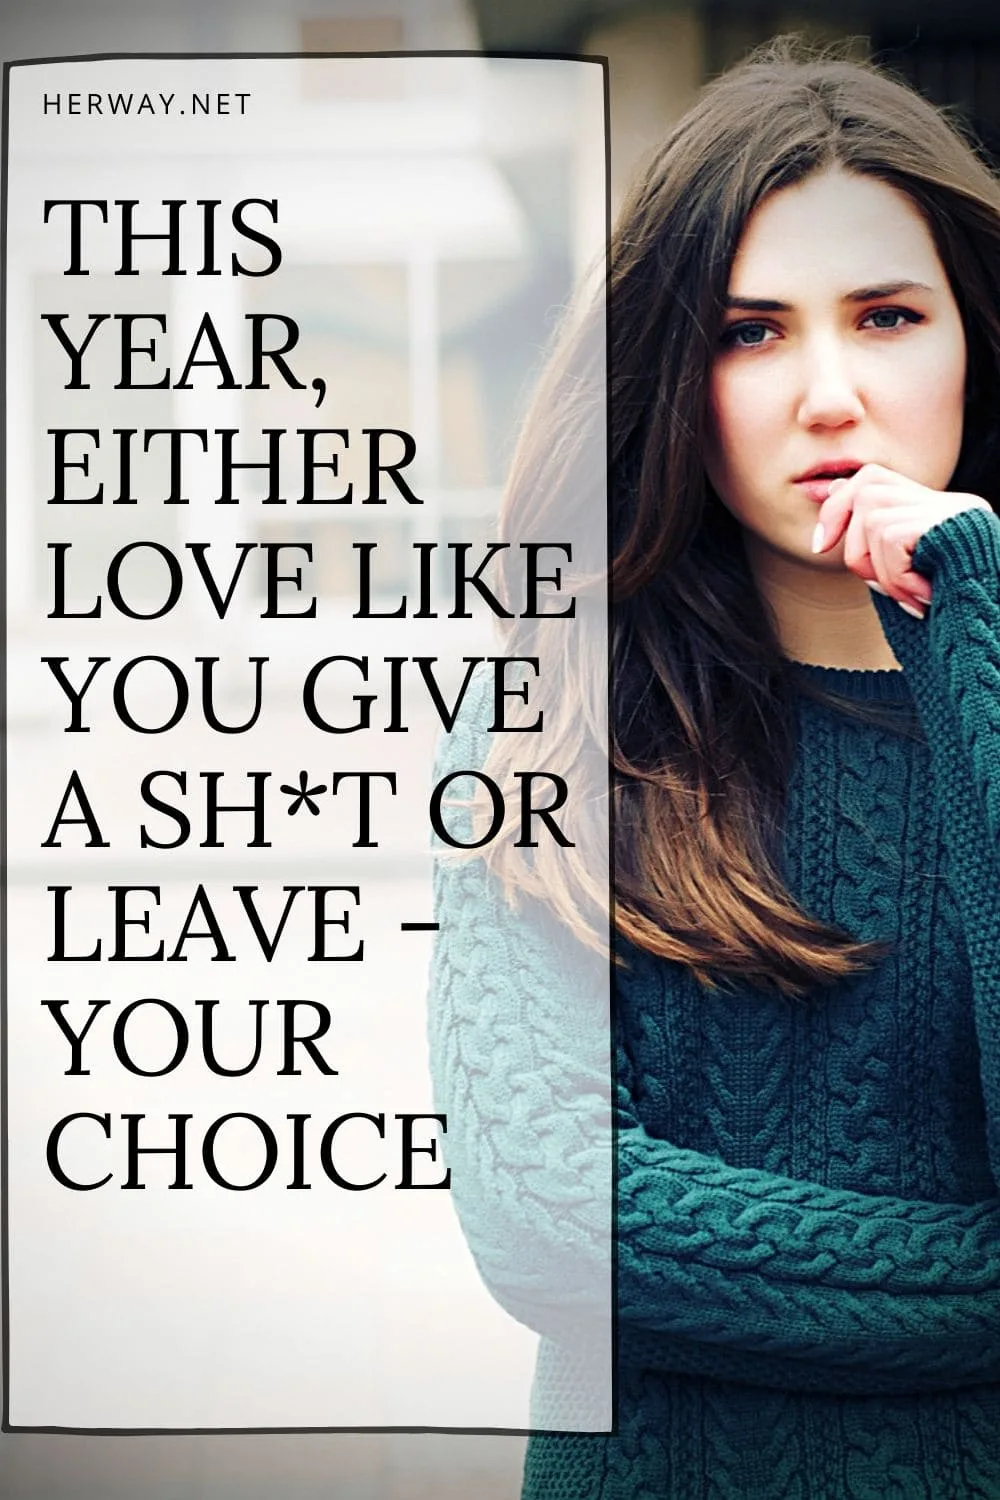 This Year, Either Love Like You Give A Sh*t Or Leave - Your Choice